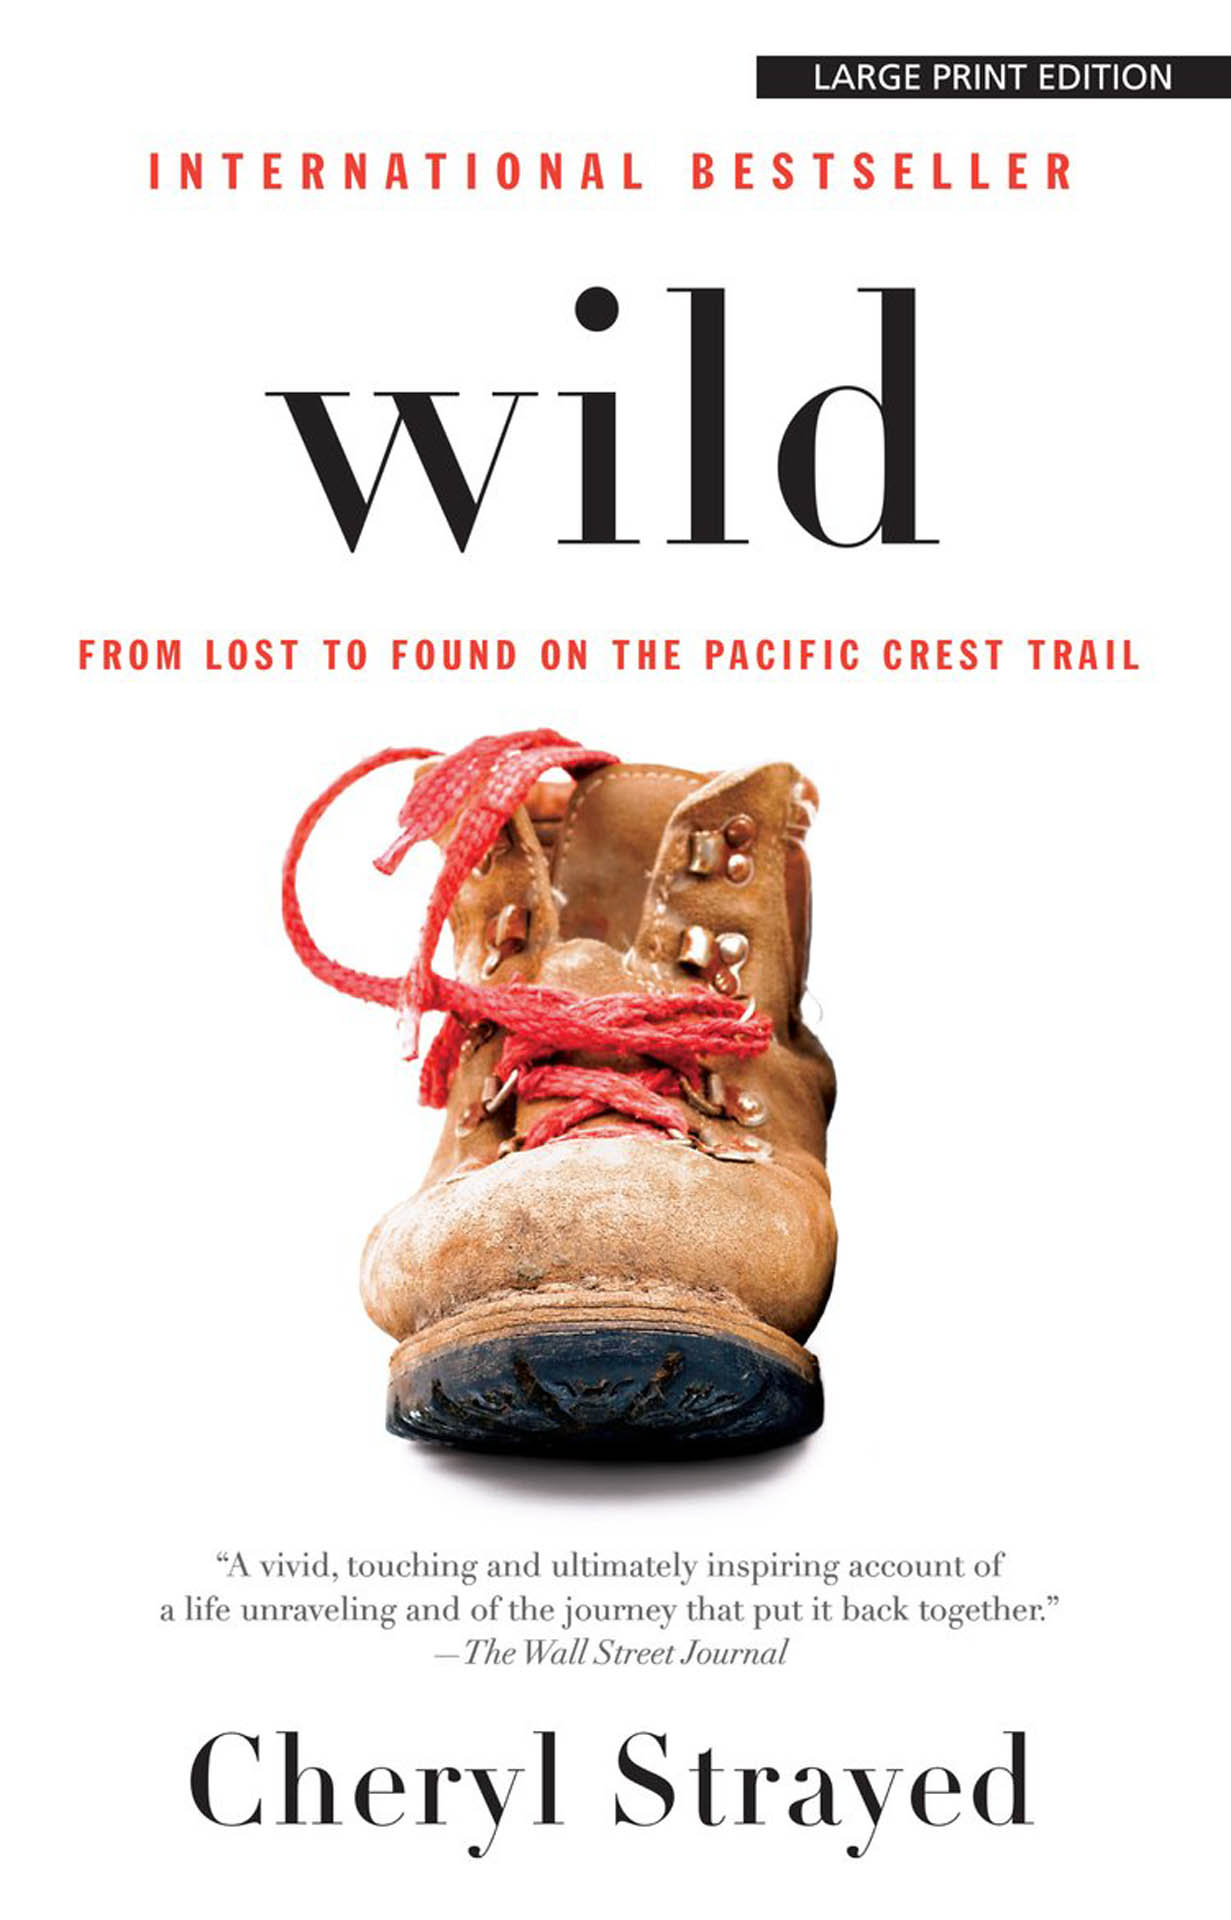 Wild - Lost and Found on the Pacific Coast Trail by Cheryl Strayed